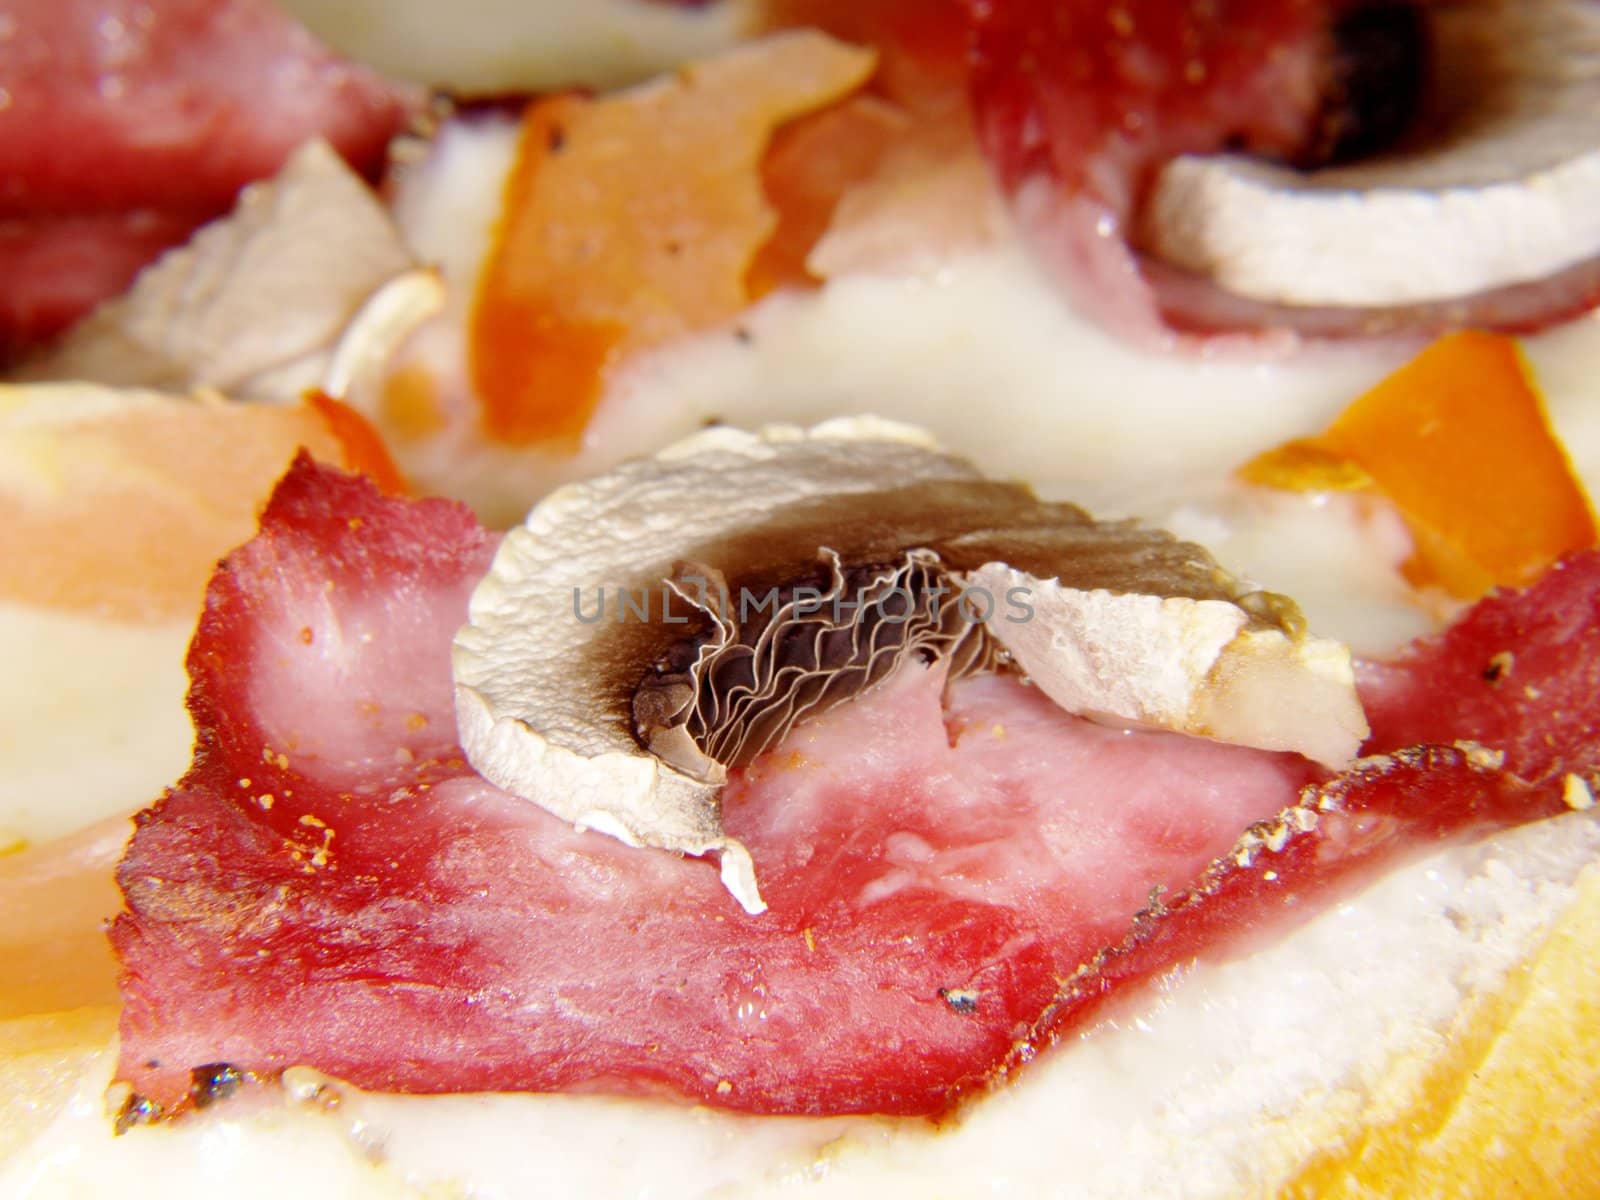 Sliced champignon melted cheese and ham by Arvebettum